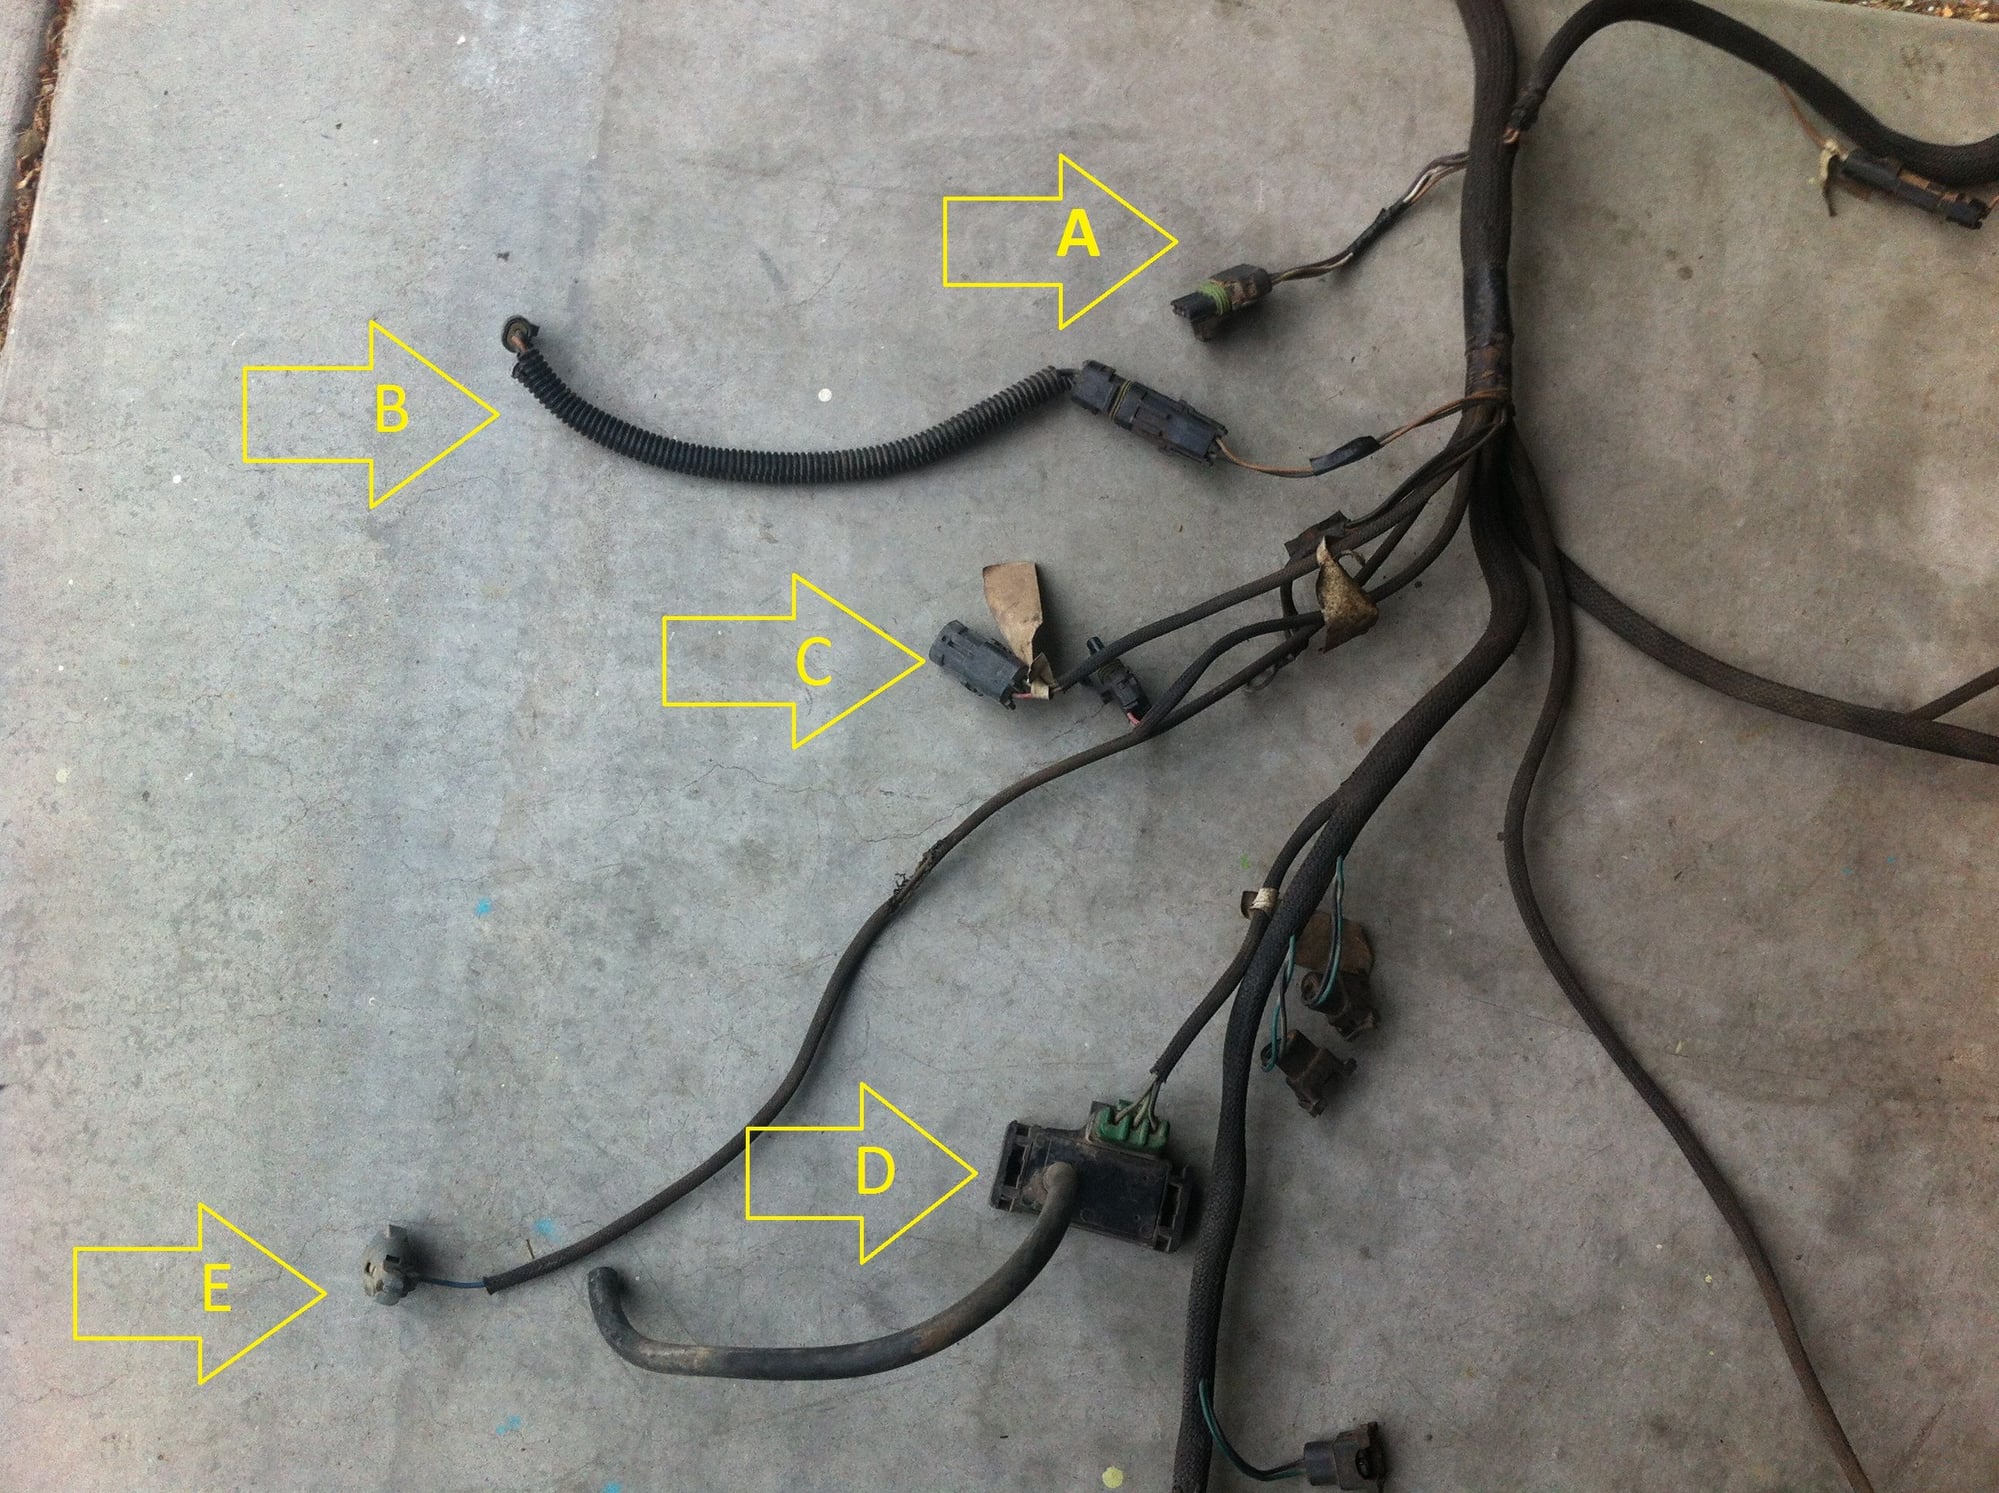 Help with Engine Re-Wiring - Third Generation F-Body Message Boards